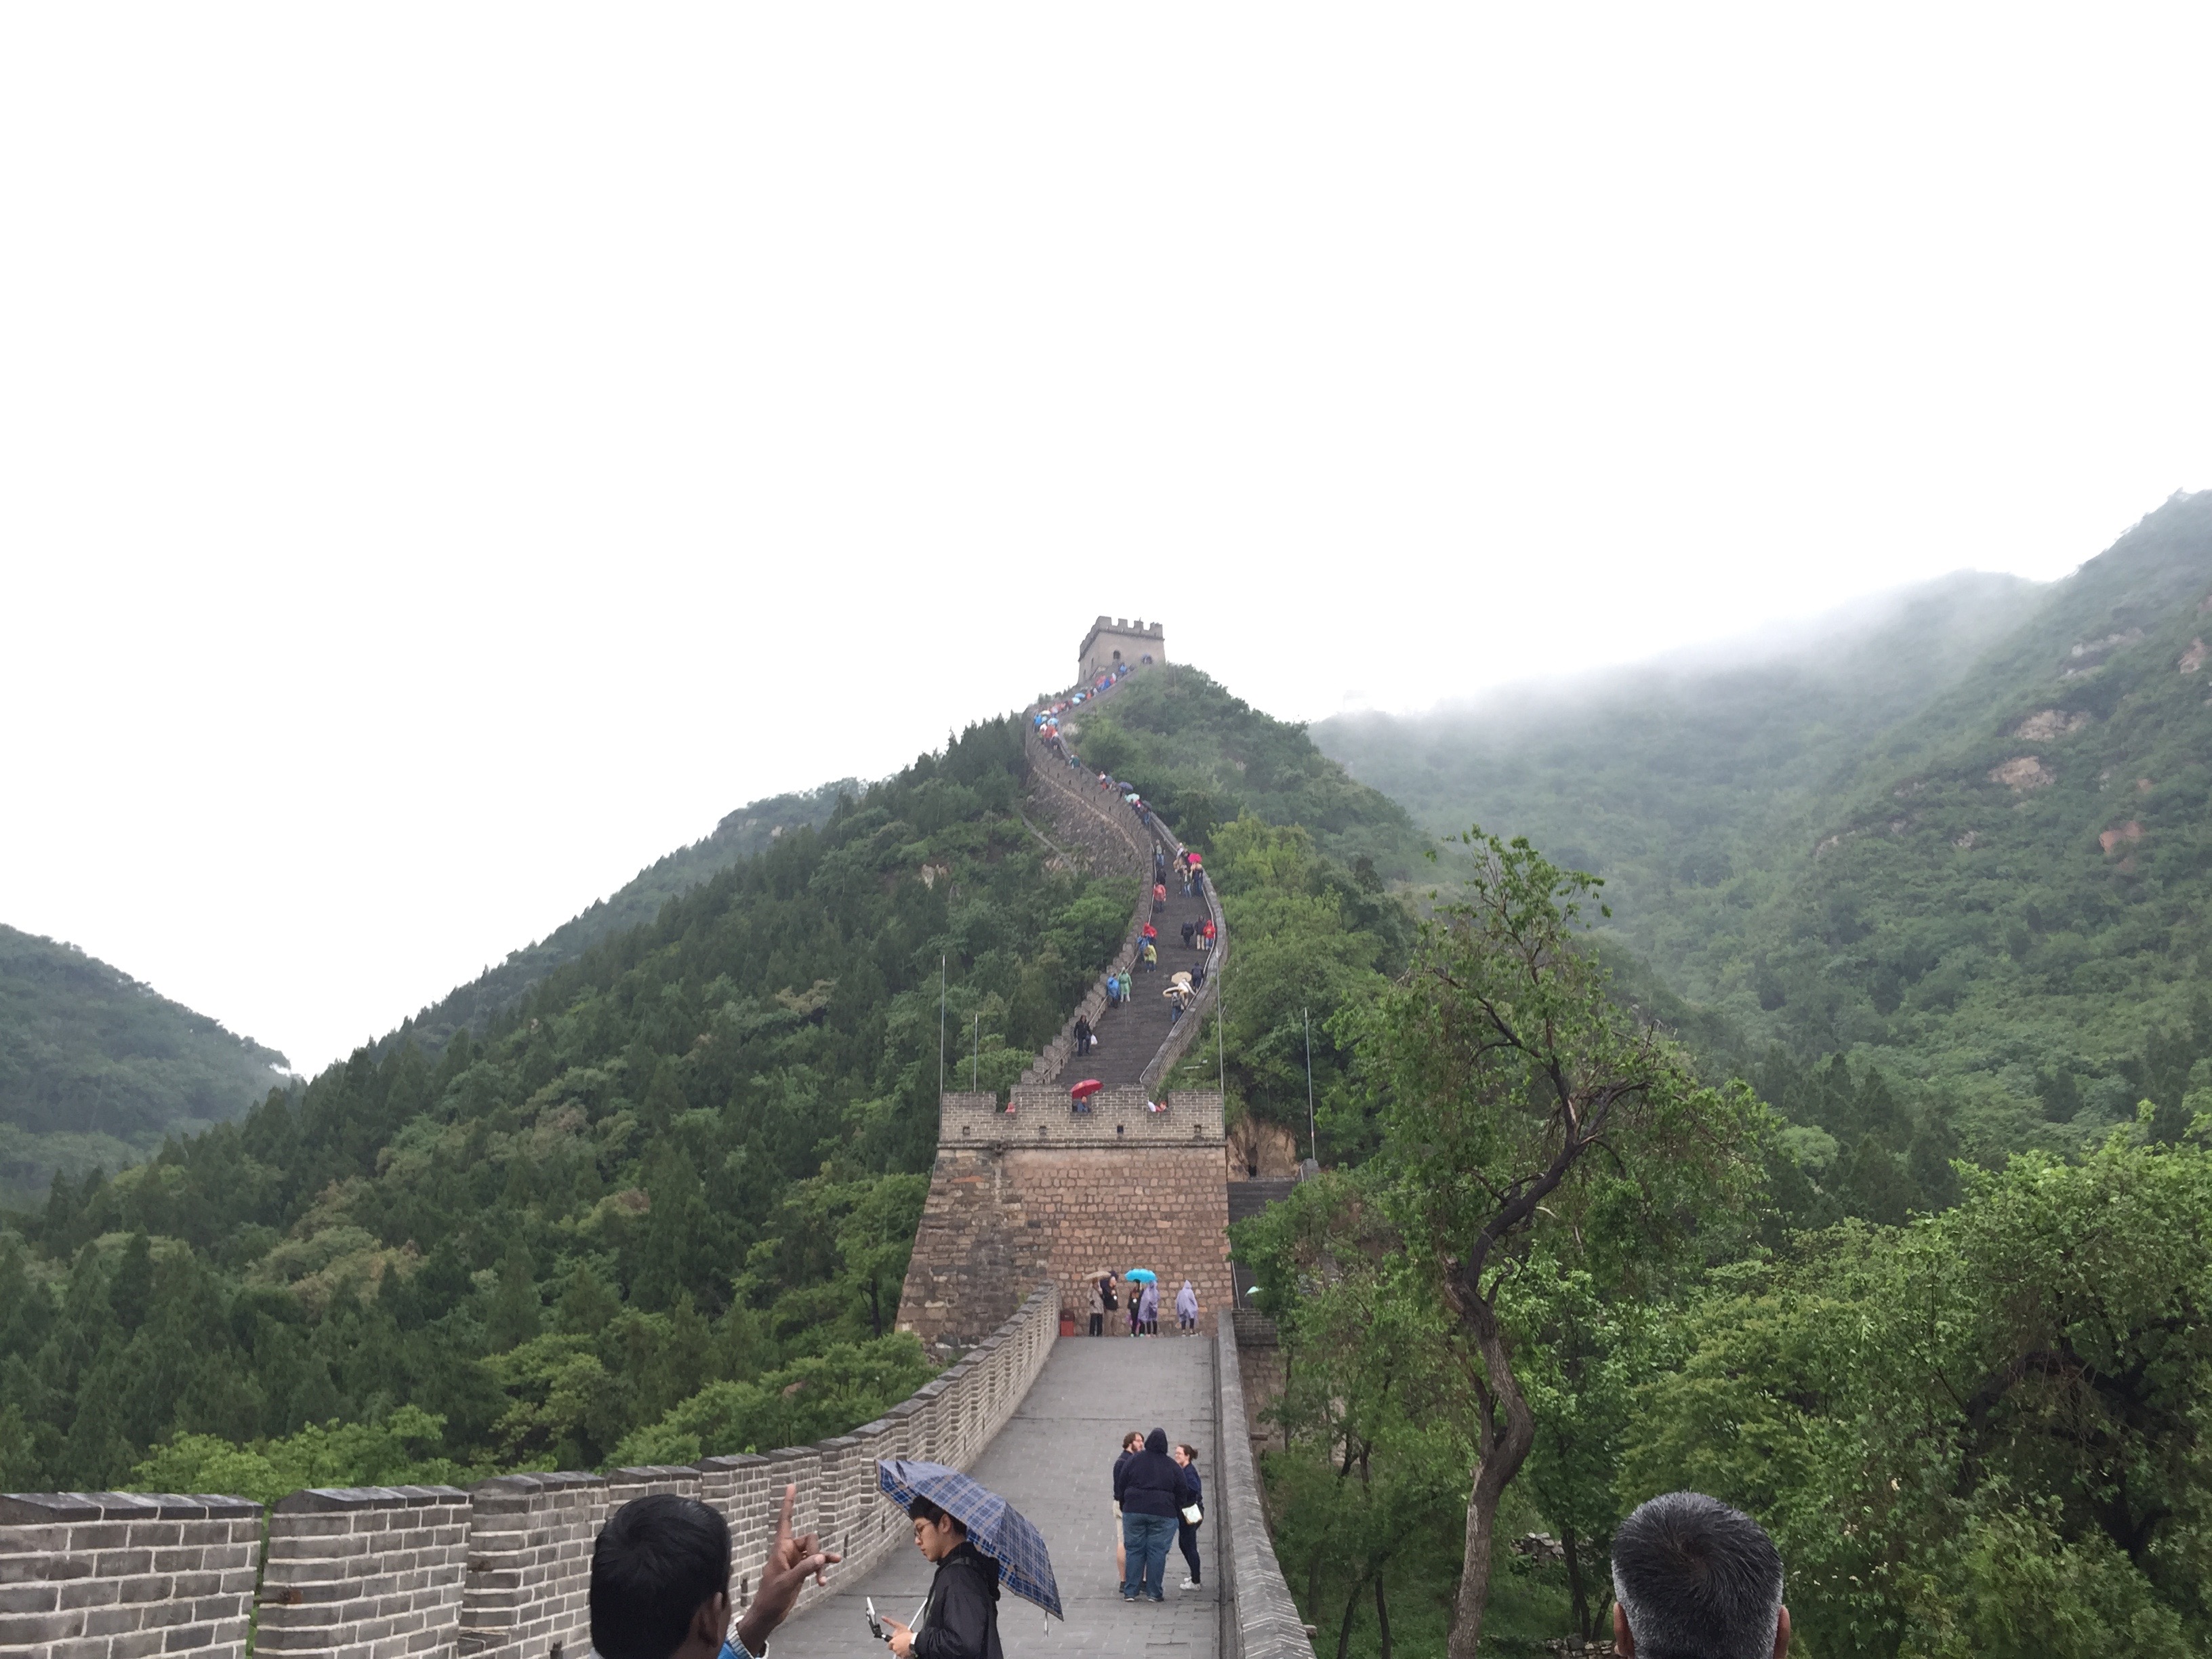 The choir visits the Great Wall of China